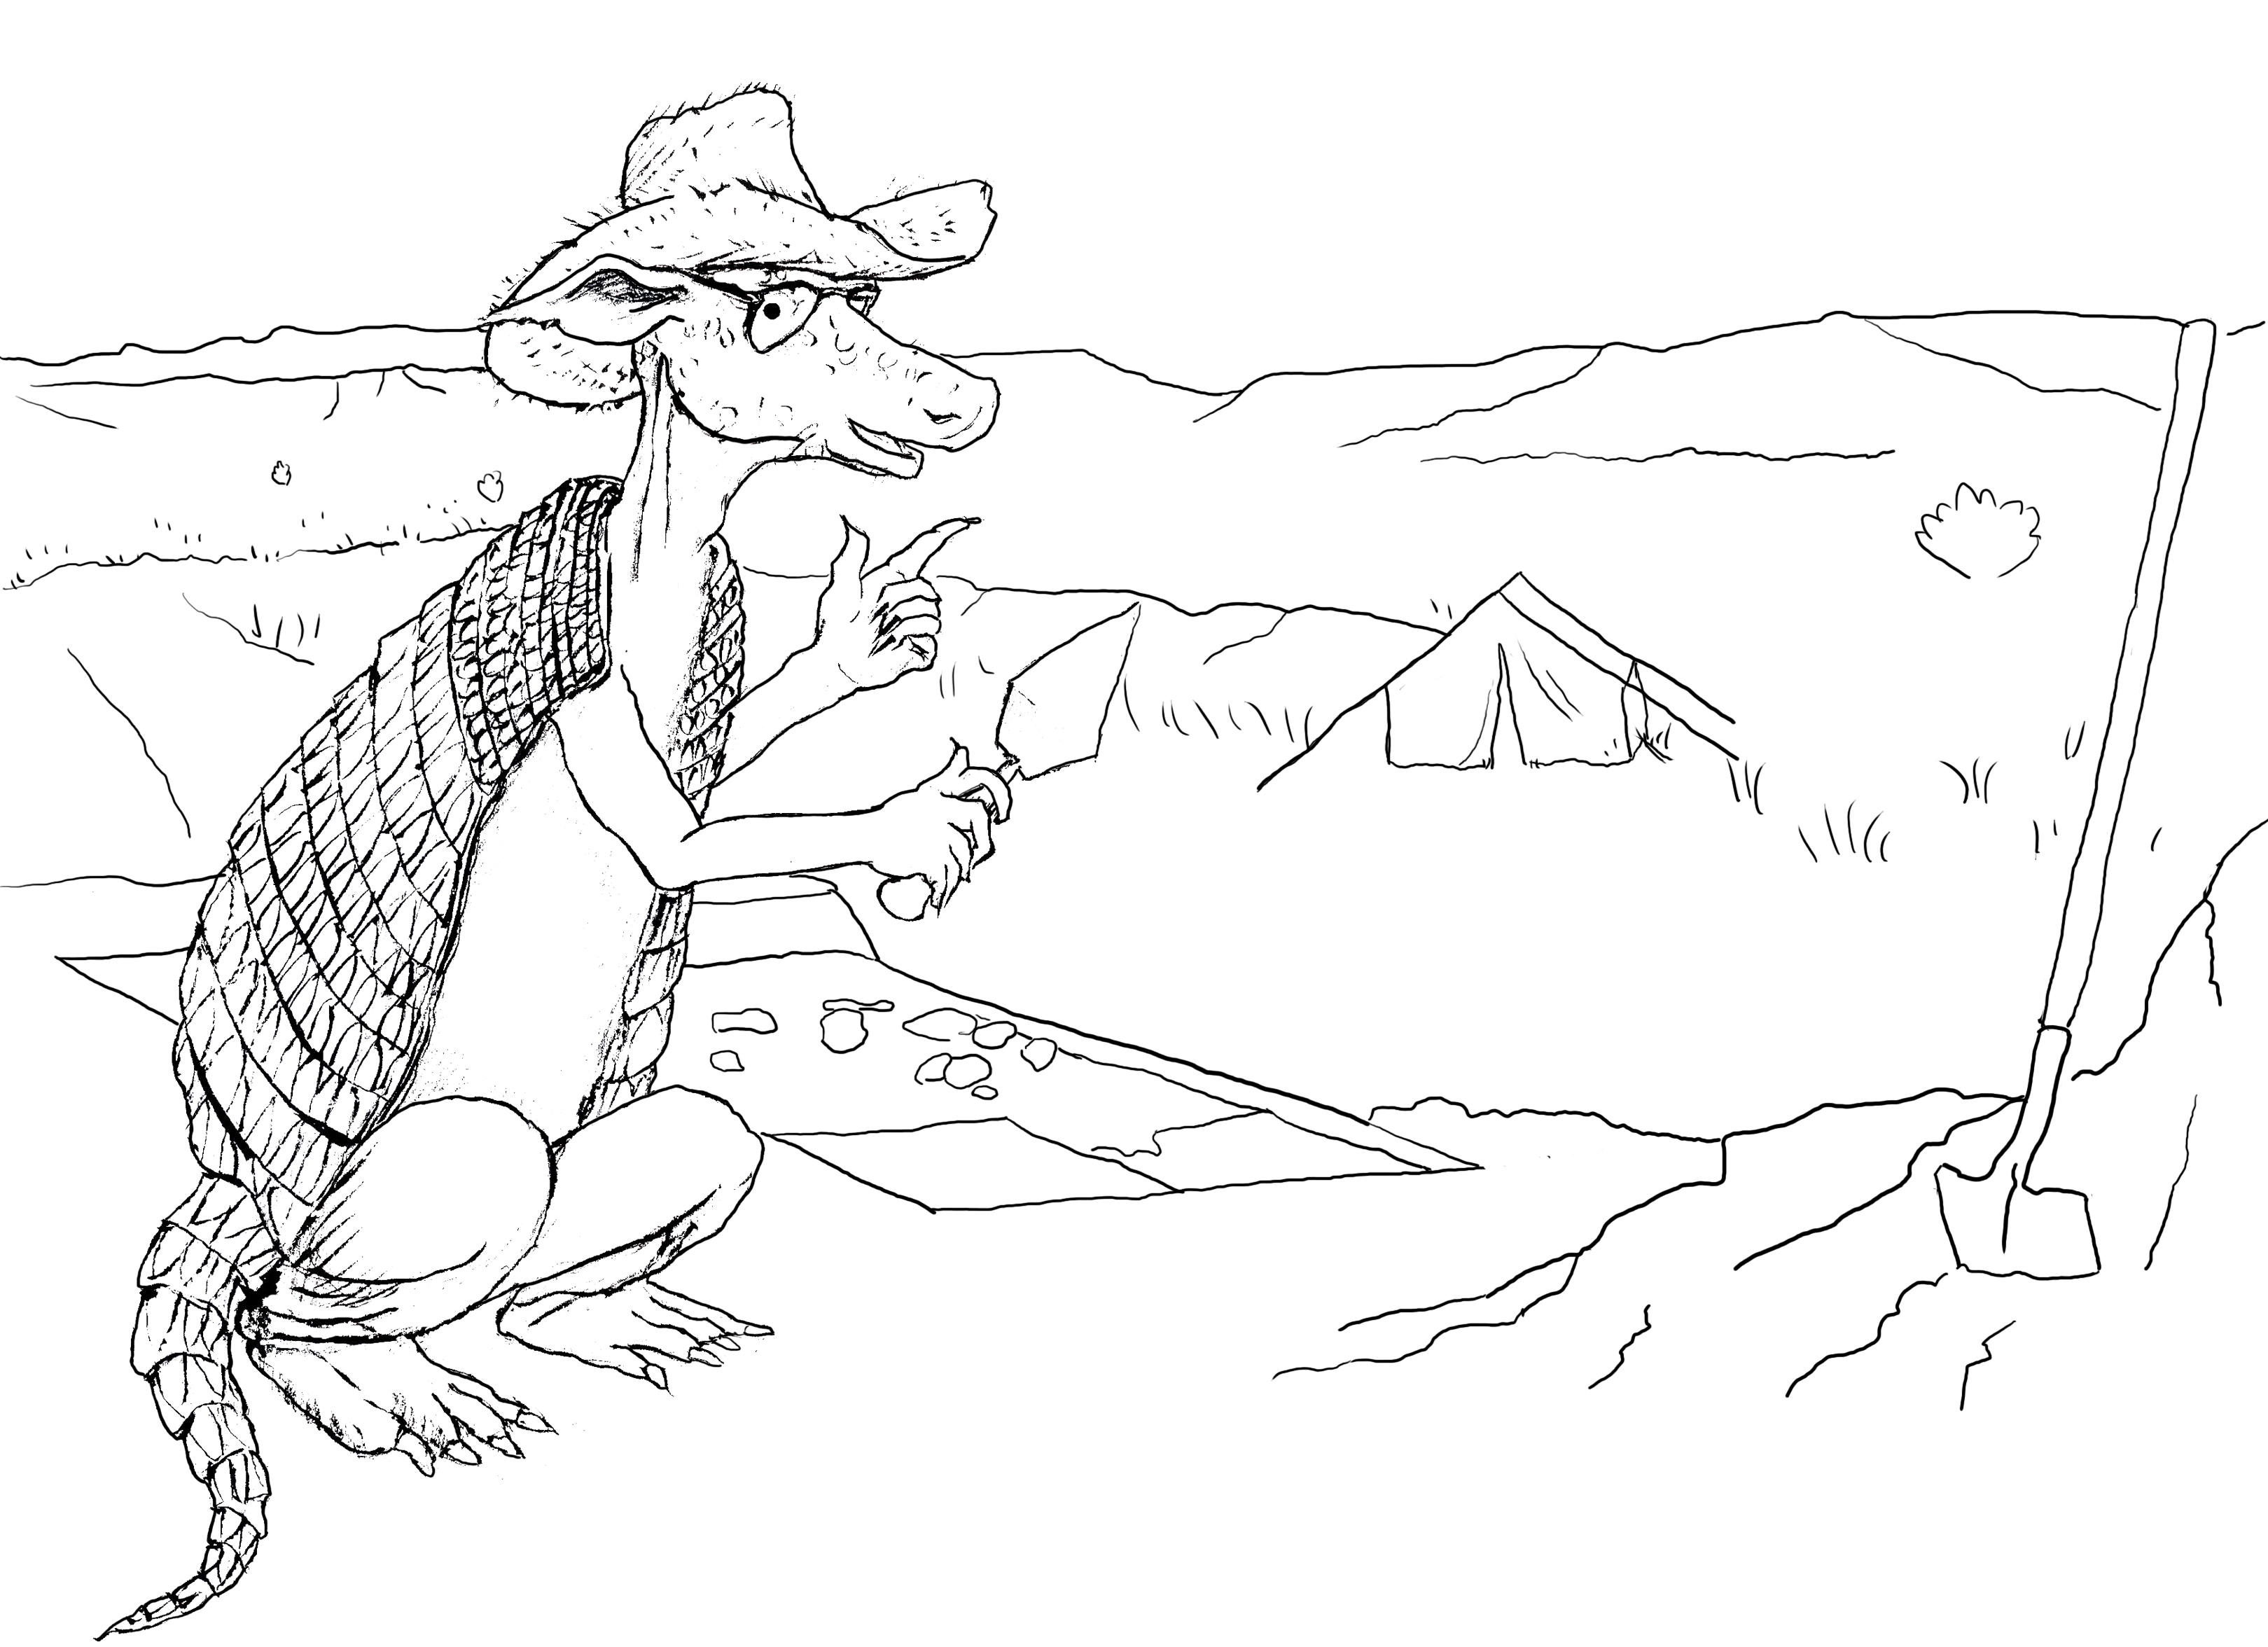 black and white line drawing of an armadillo archeologist squatting in front of an excavation with cliffs in the background